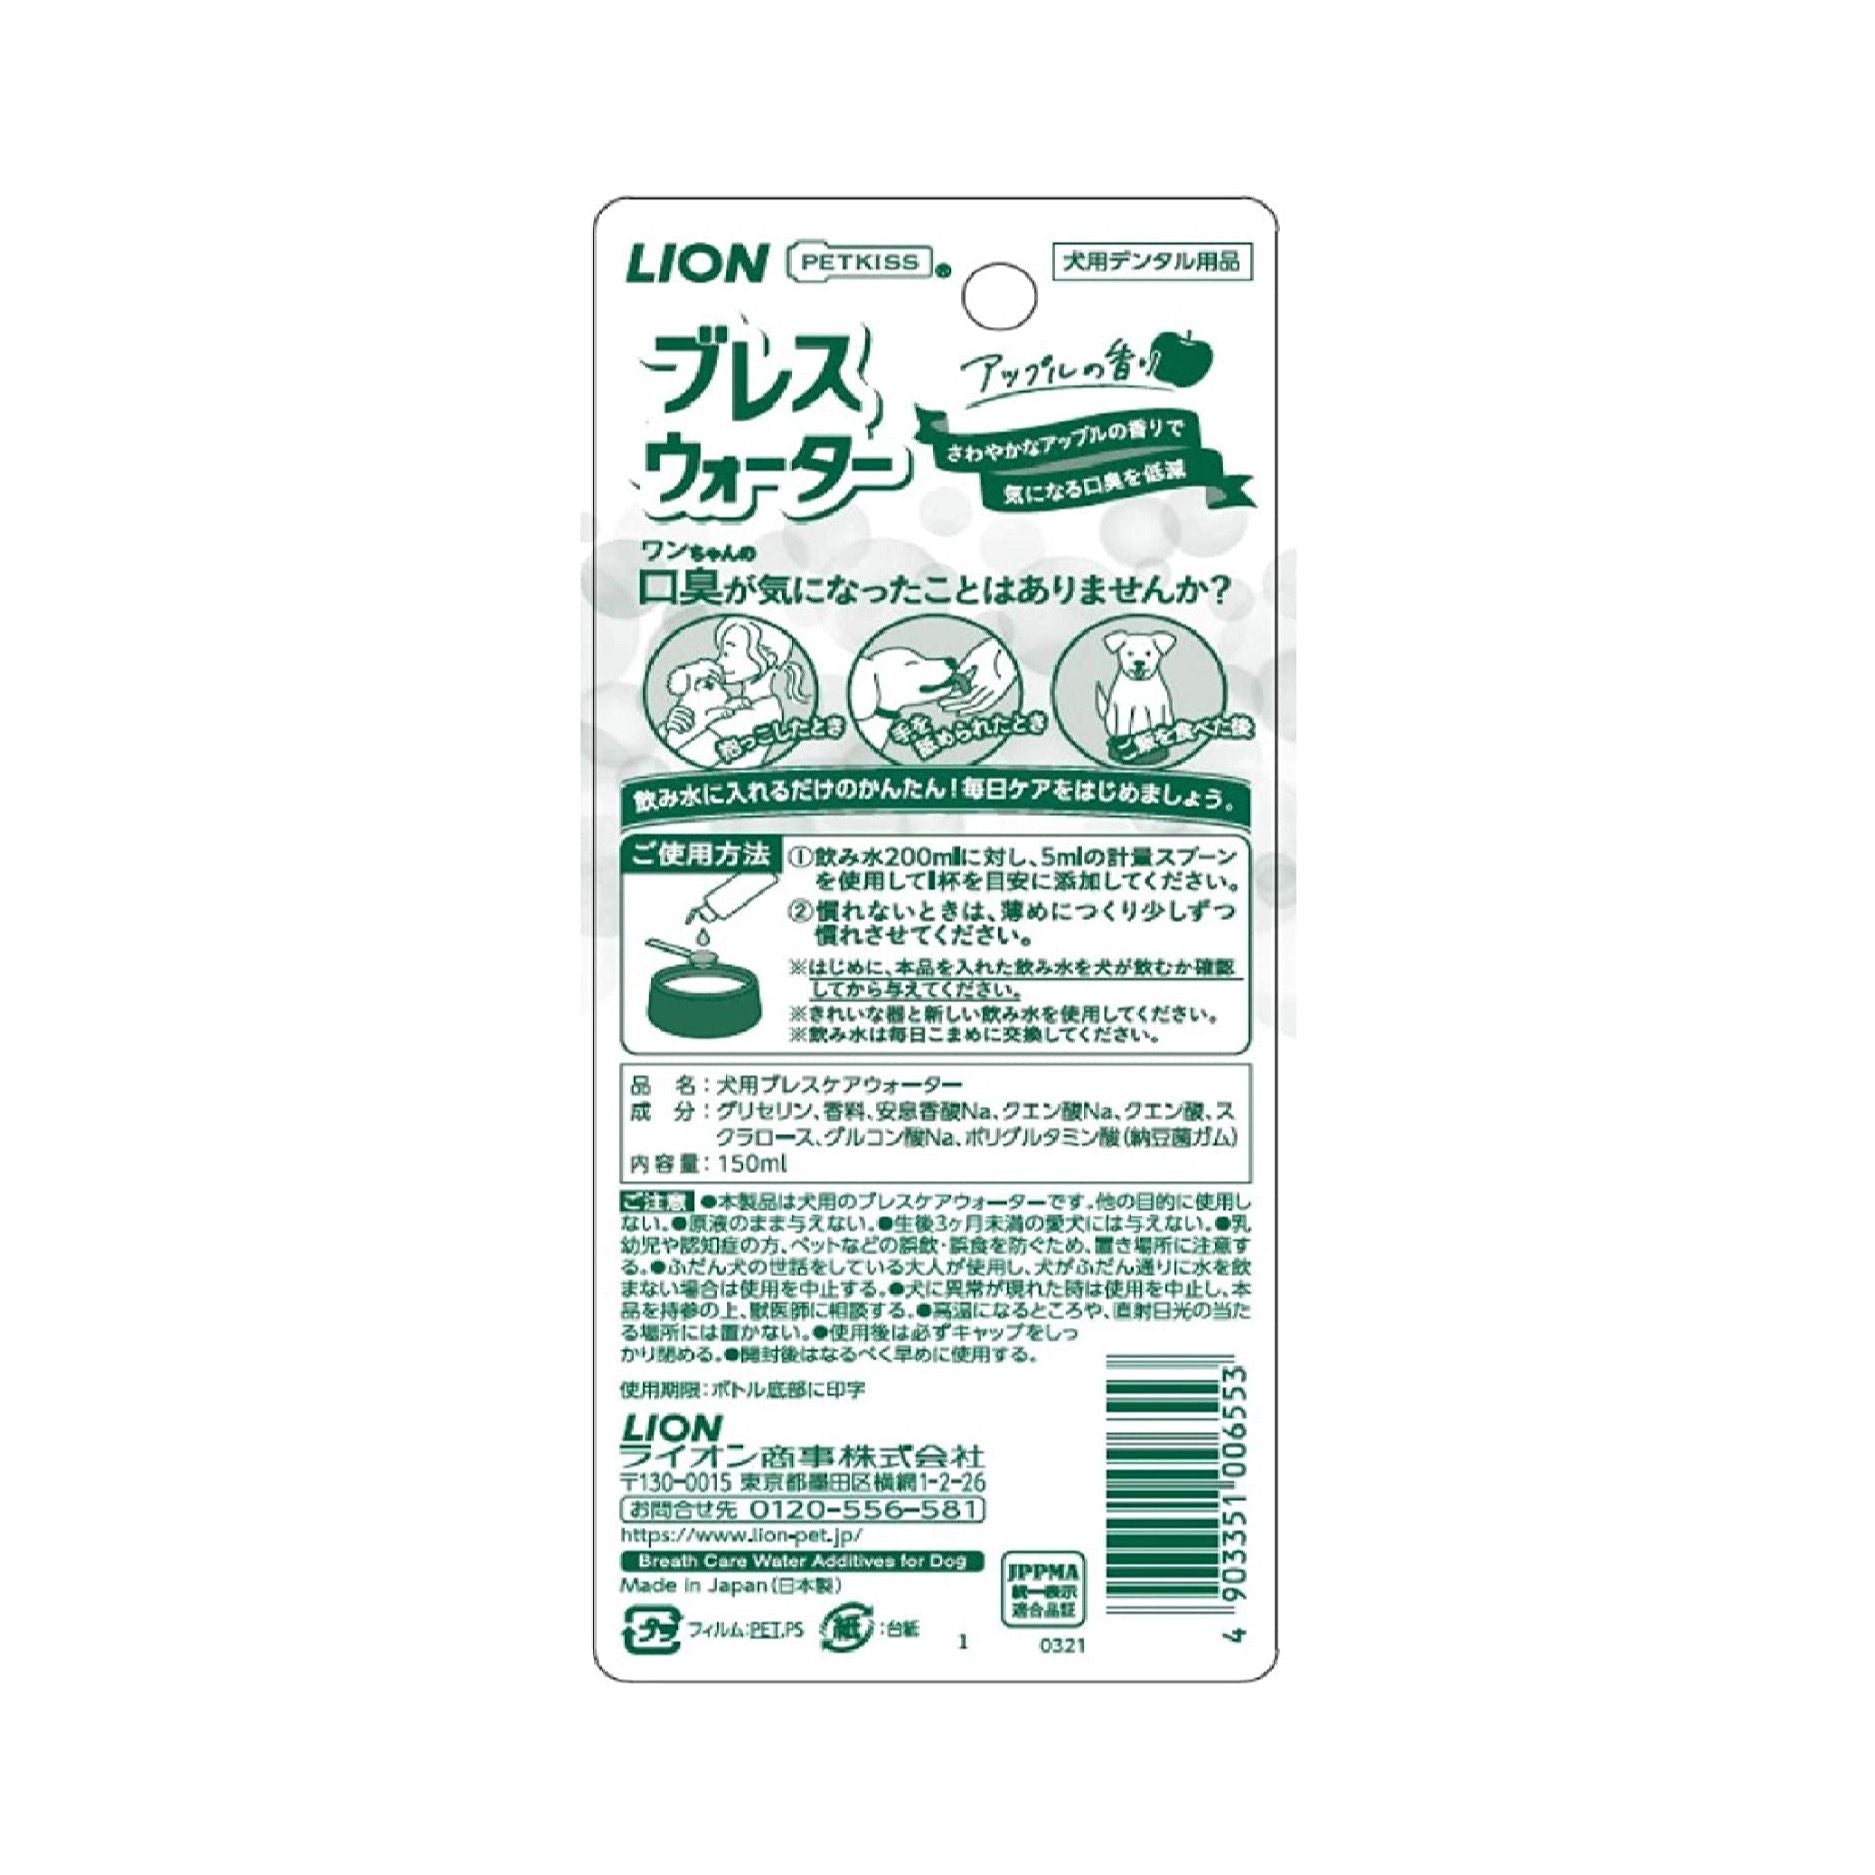 [6-PACK] Lion Japan Breath Care Water For Dog Apple Scent 150ml